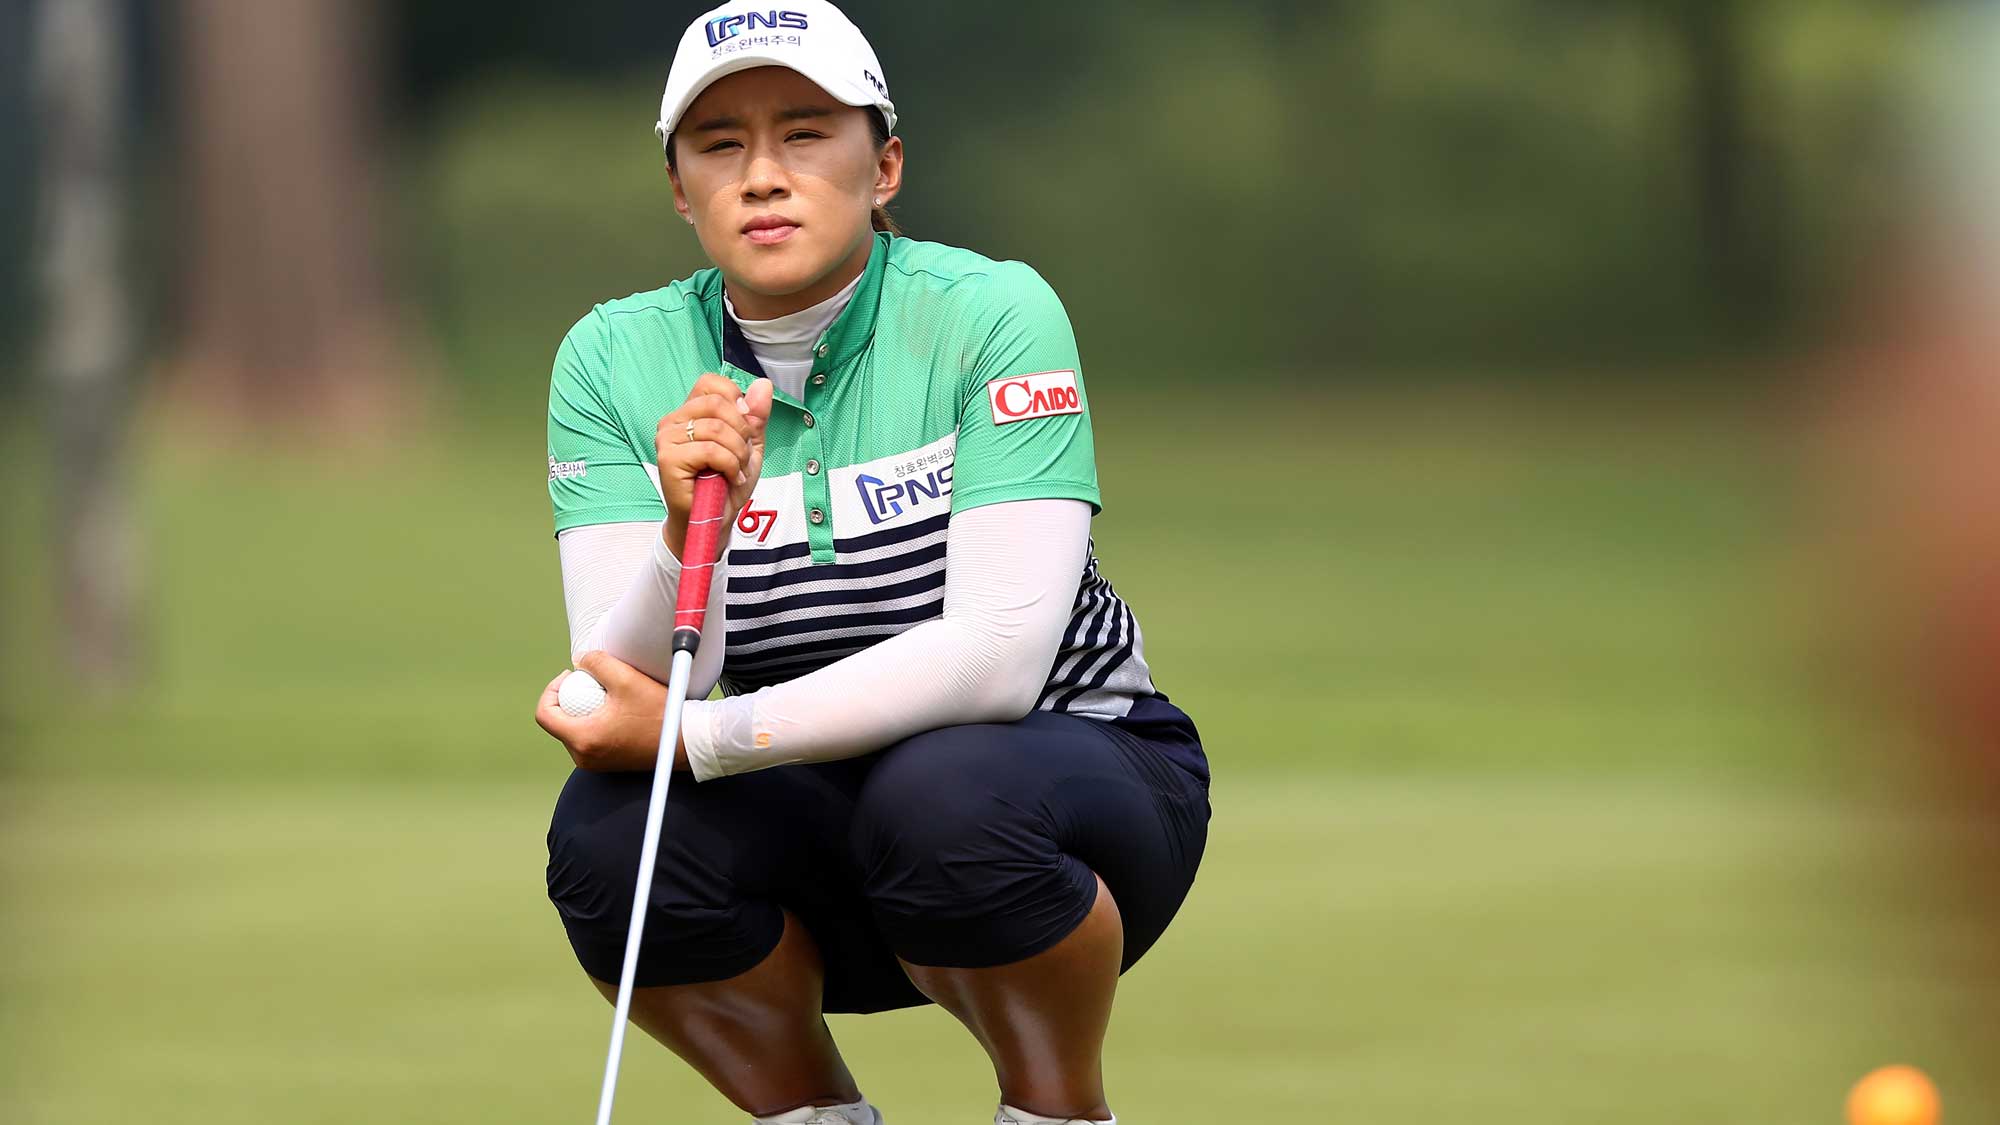 Amy Yang of South Korea waits for her turn to putt on the 3rd hole during round three of the Sime Darby LPGA Tour at Kuala Lumpur Golf & Country Club